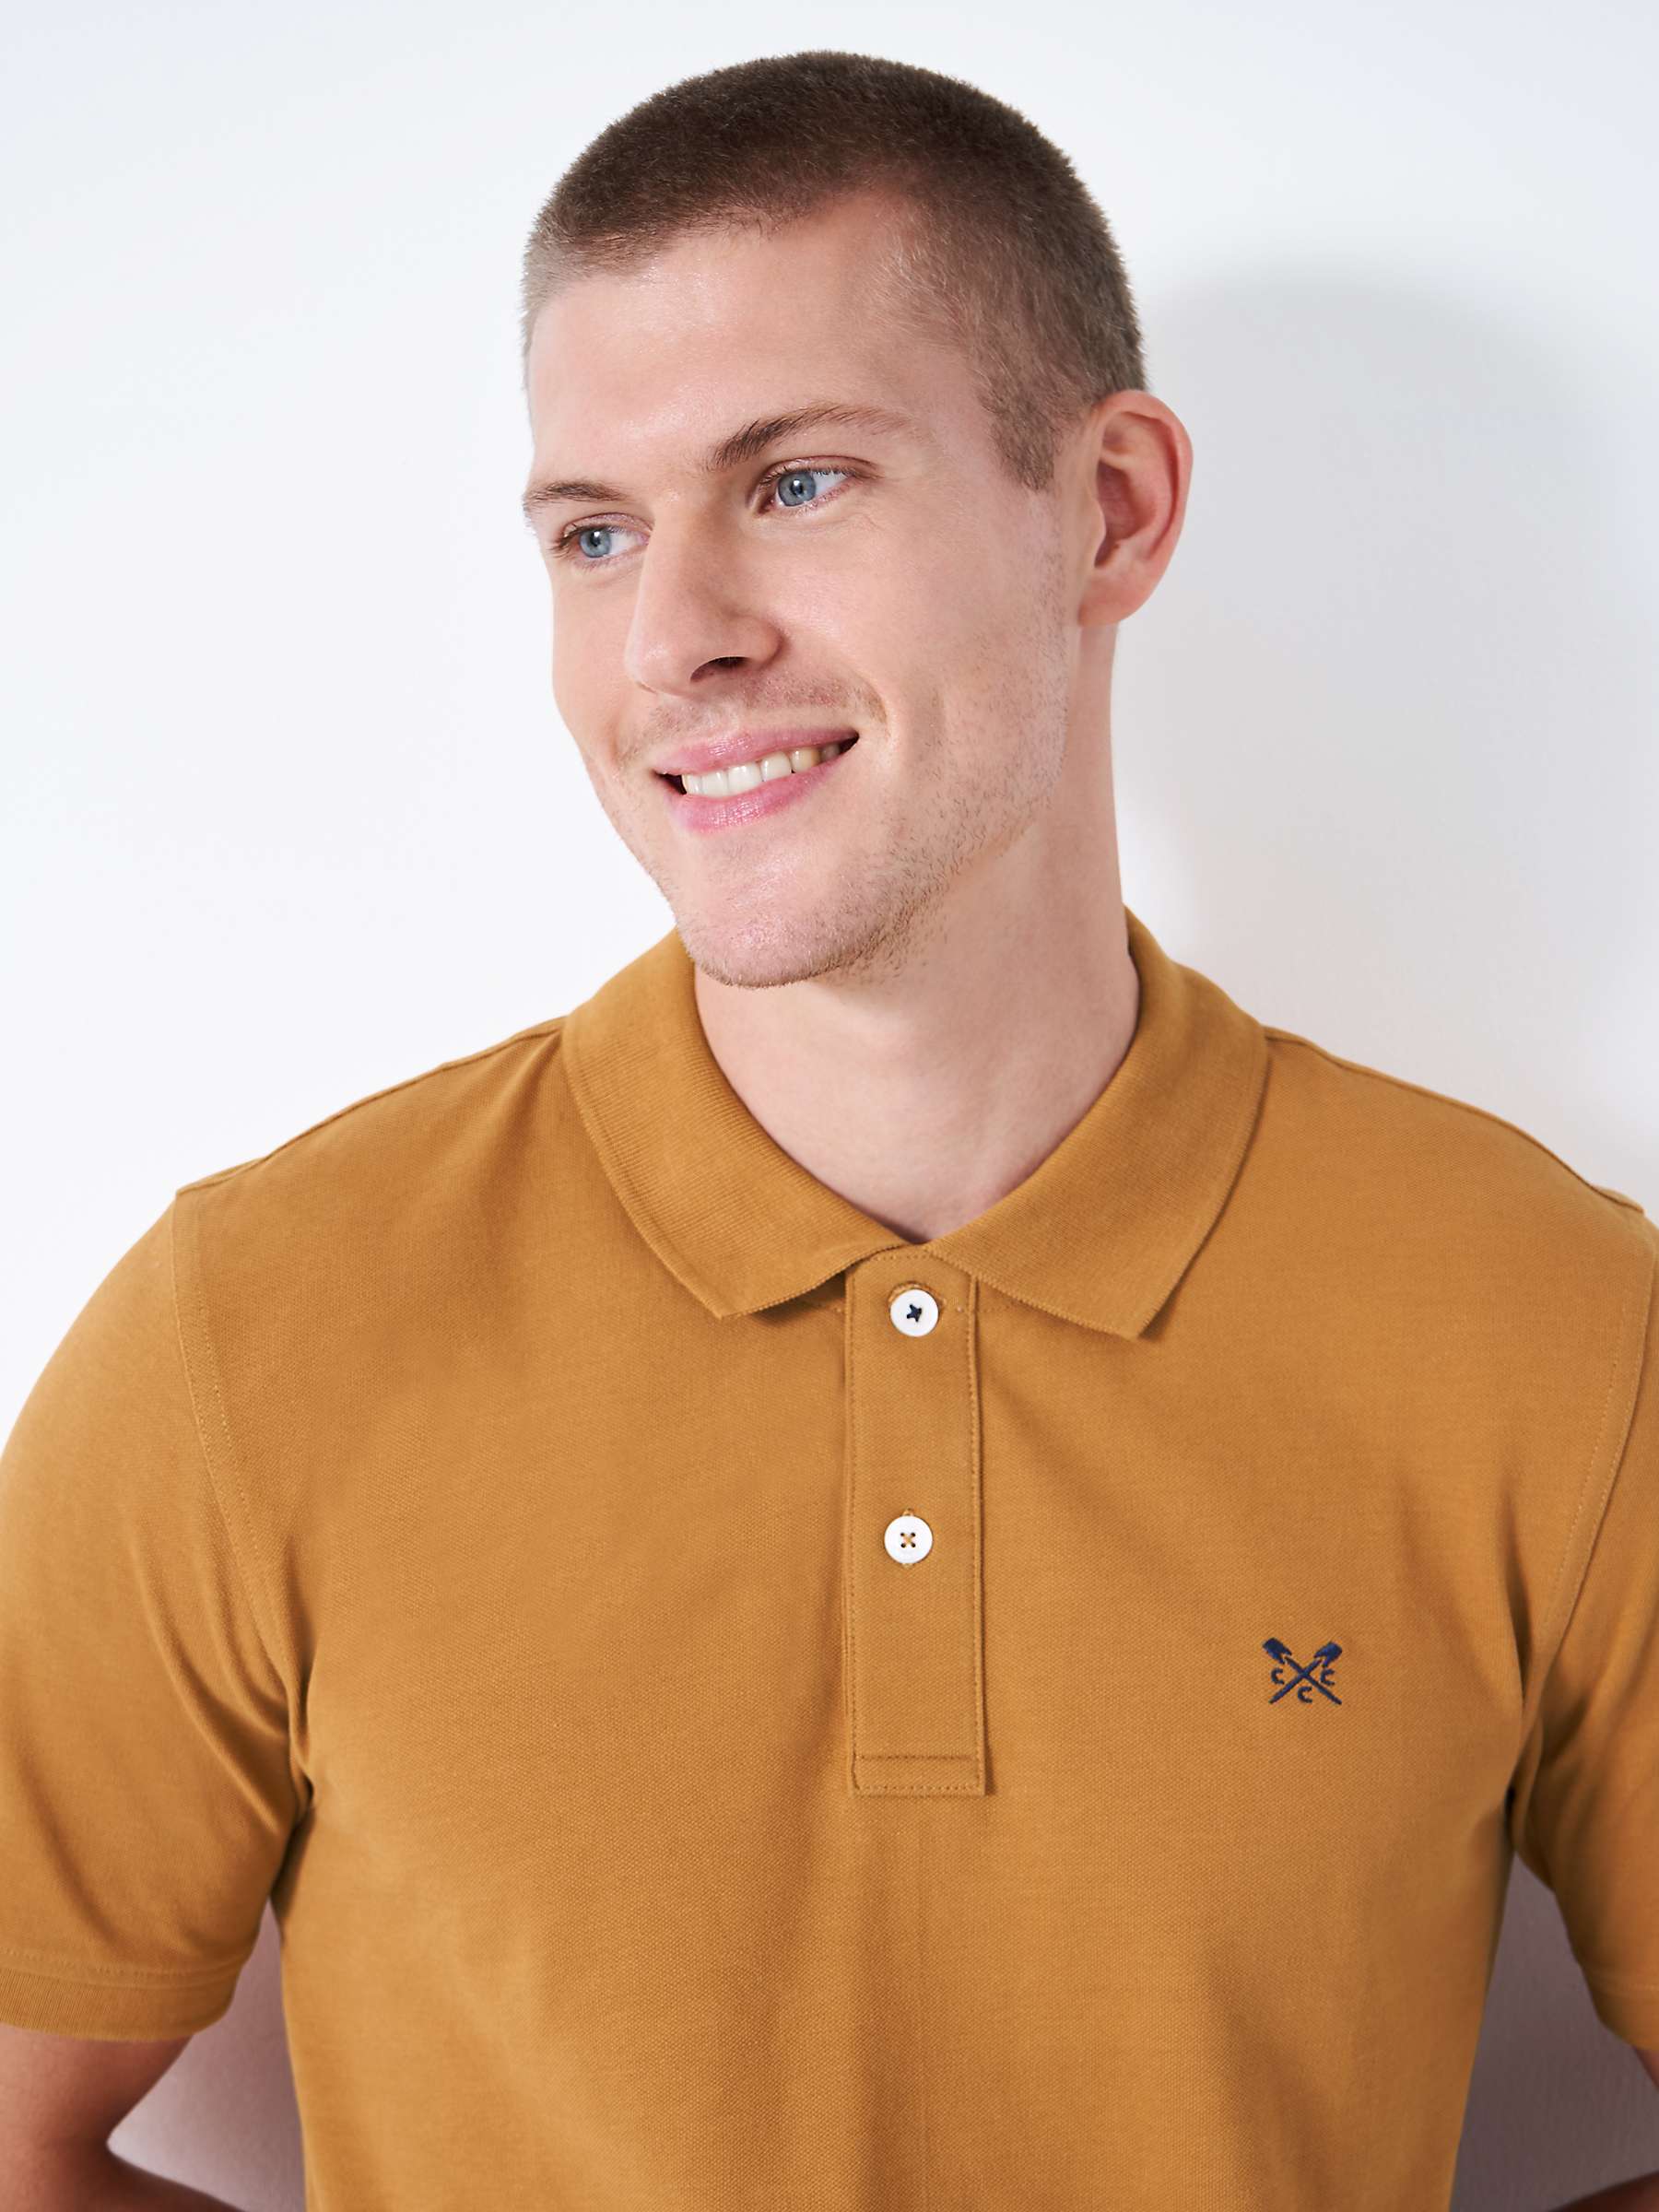 Buy Crew Clothing Classic Pique Polo Shirt Online at johnlewis.com